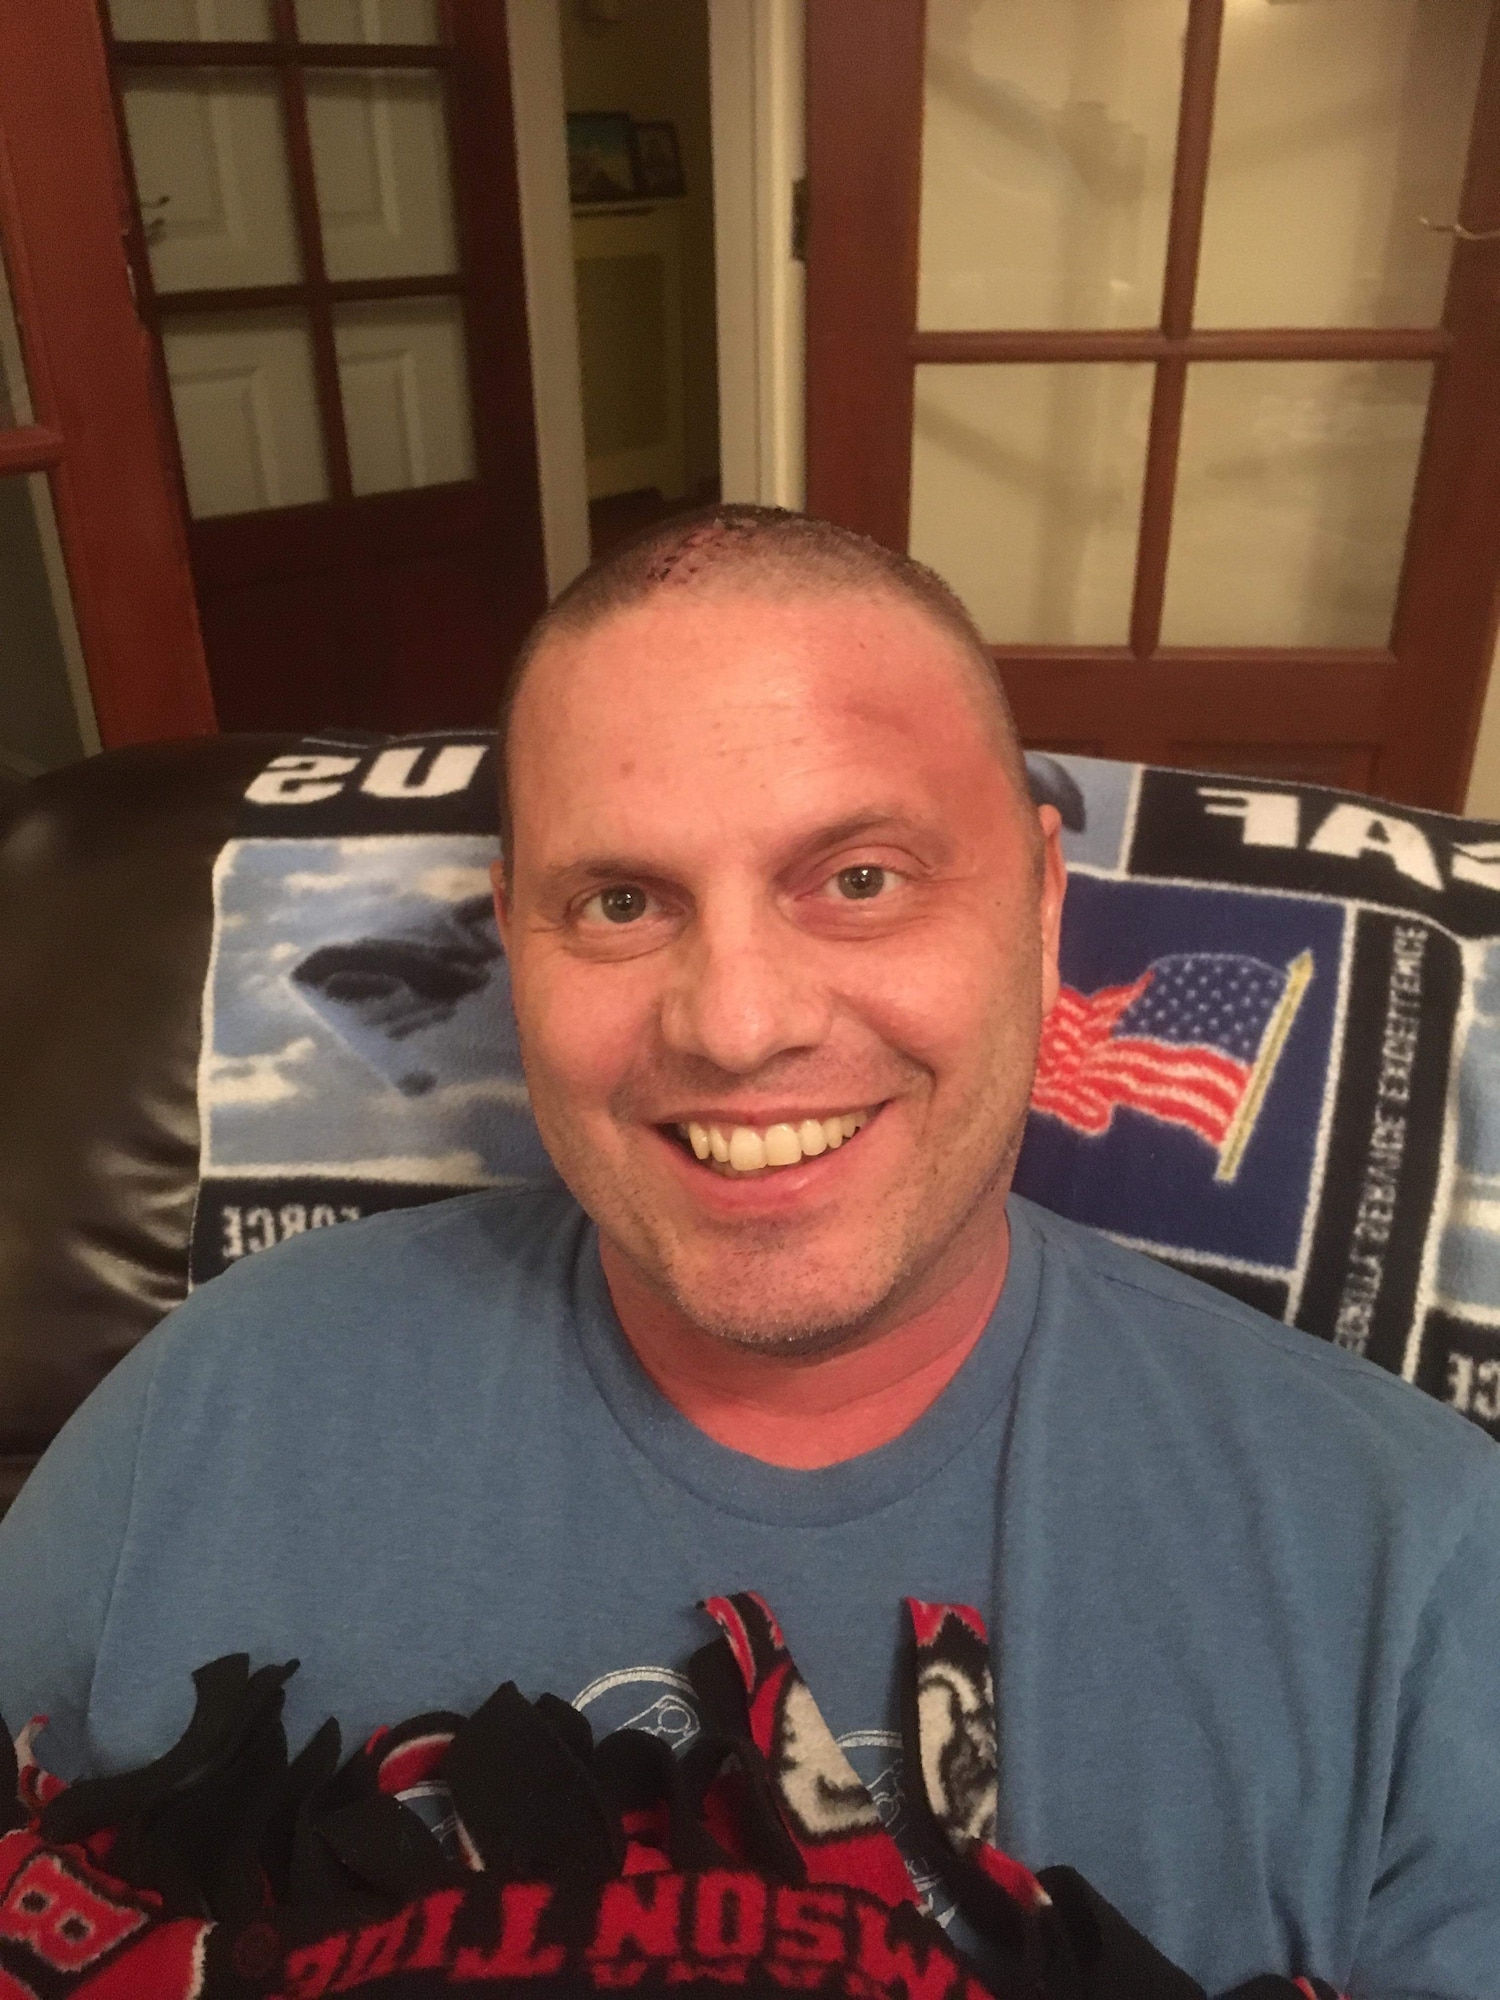 U.S. Air Force Senior Master Sgt. Carl Joseph “CJ” Spatz III, retired air traffic controller and facility manager, poses for a photo ten days after surgery, April 15, 2019. CJ was diagnosed with a brain tumor March 25, 2019 while his wife was 25 weeks pregnant with their child. (Courtesy photo)